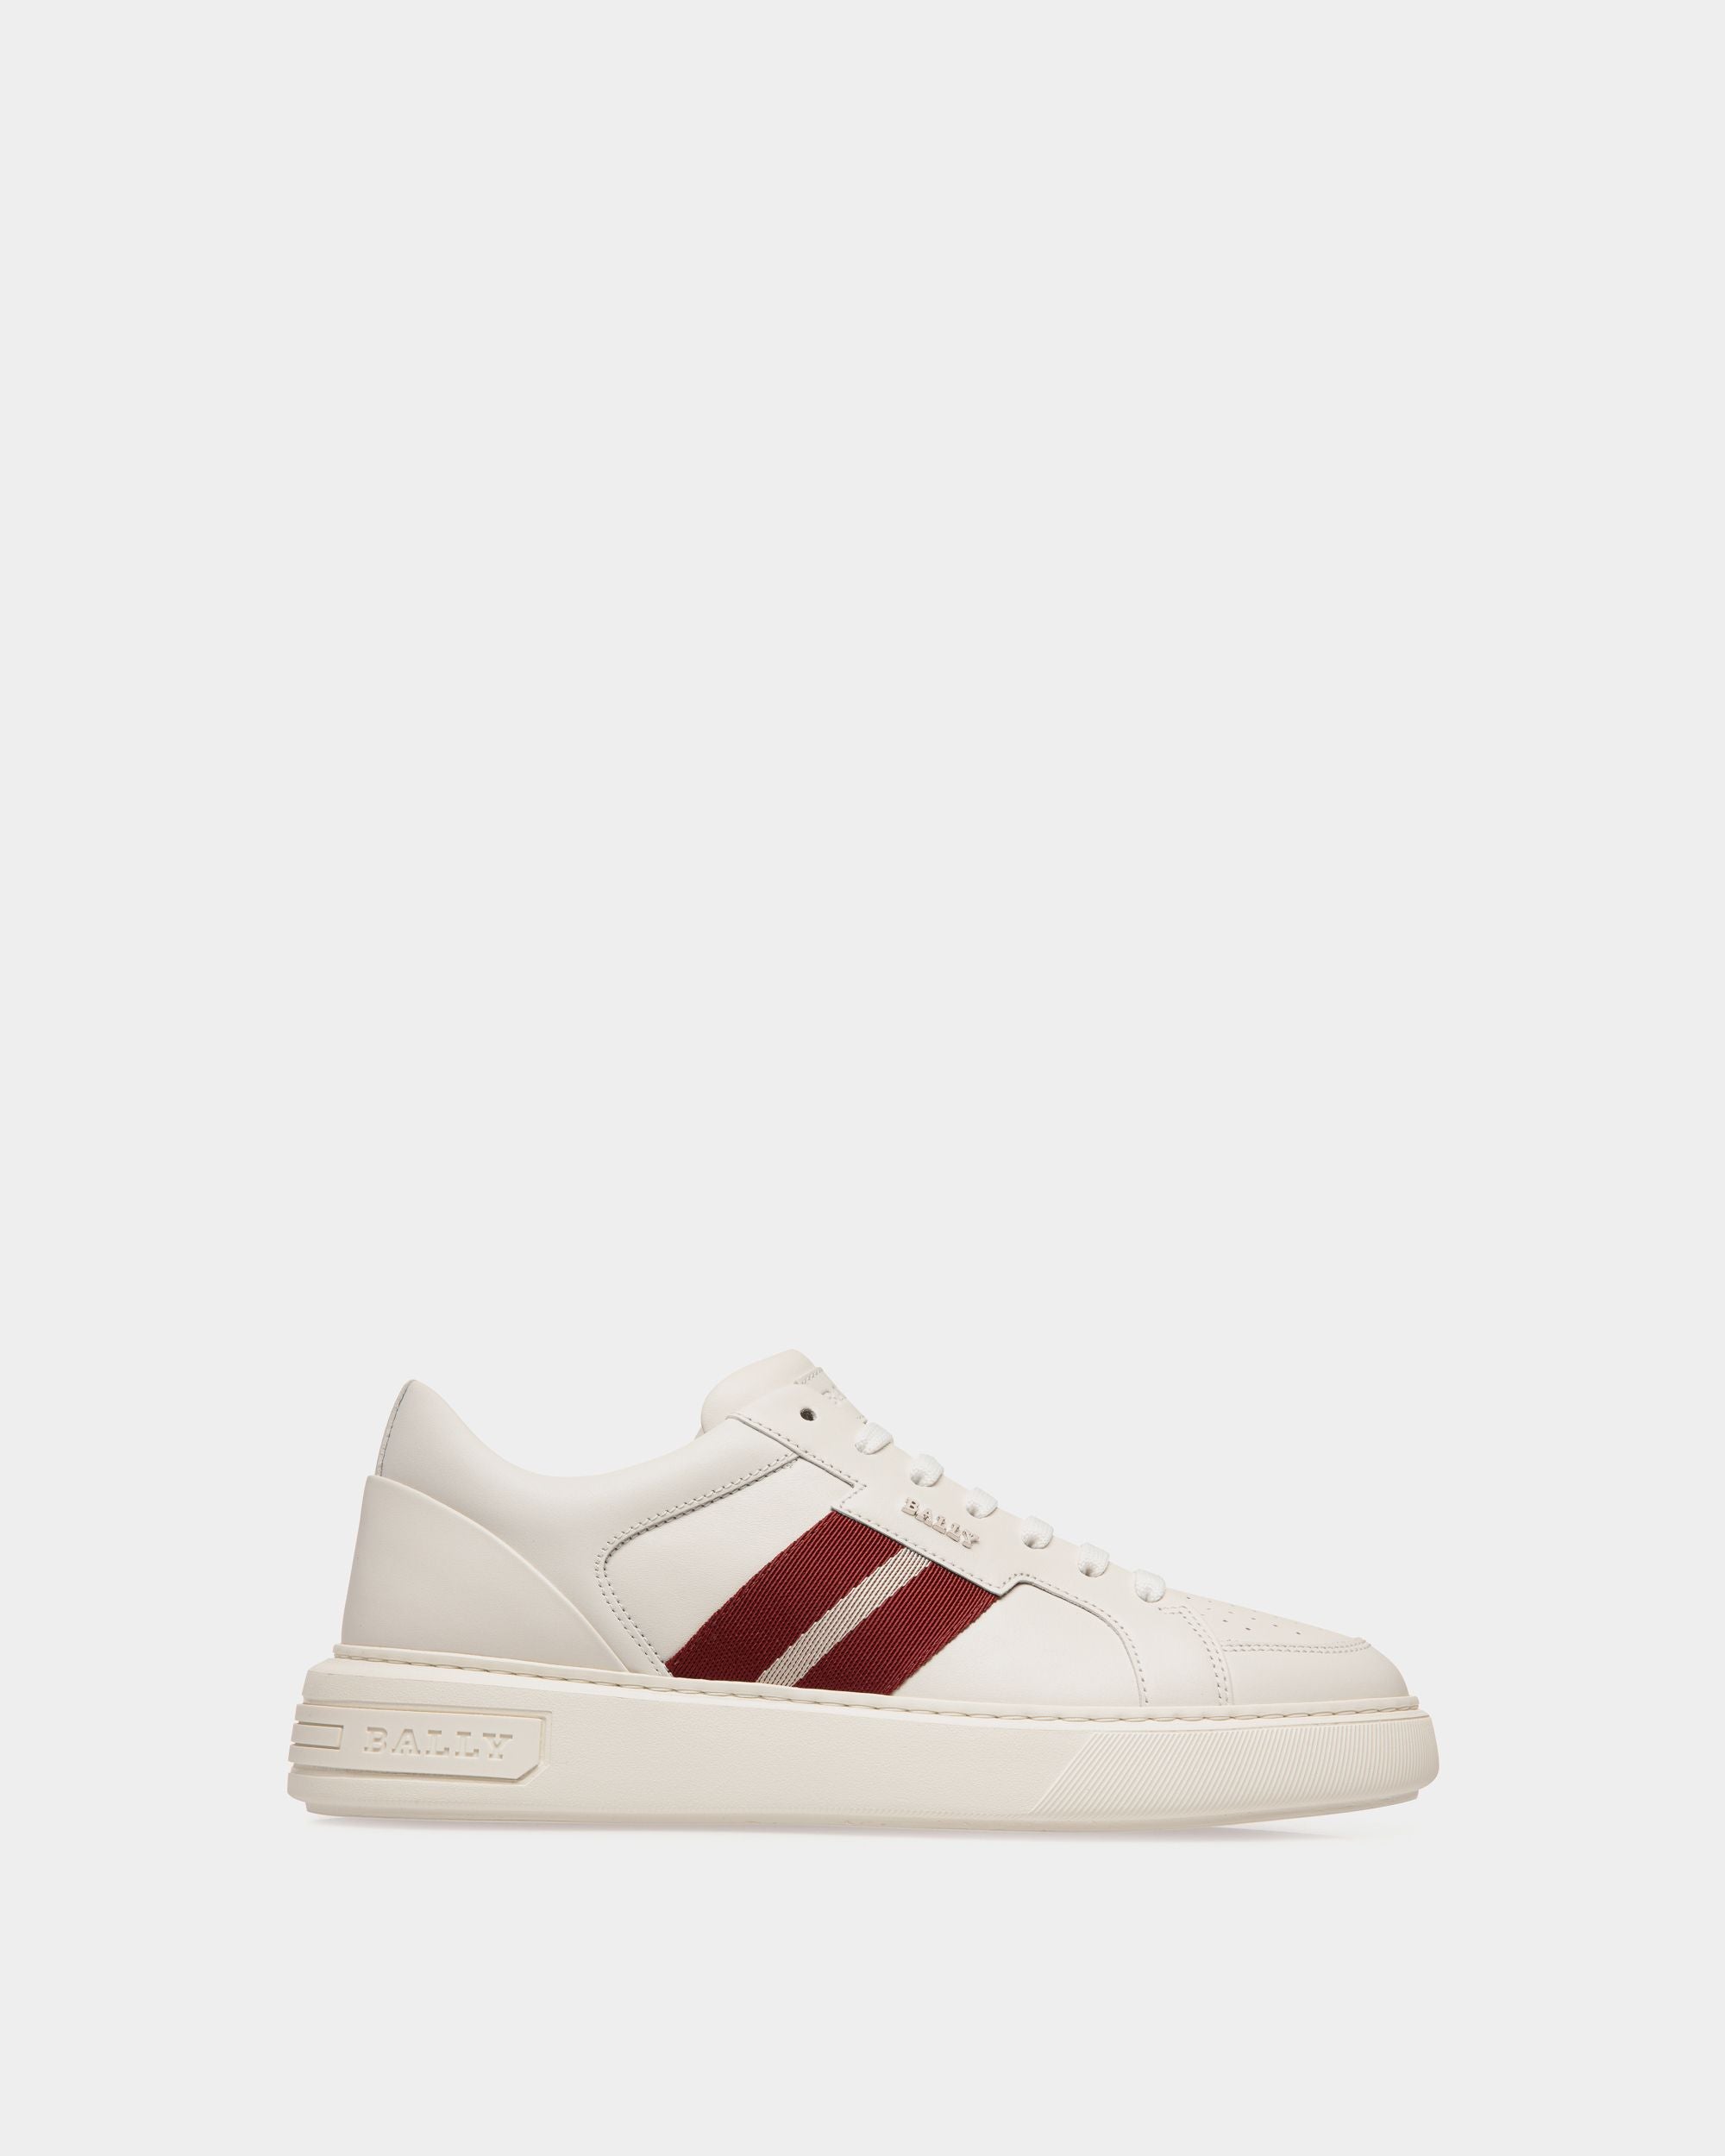 Moony | Men's Sneakers | White Leather | Bally